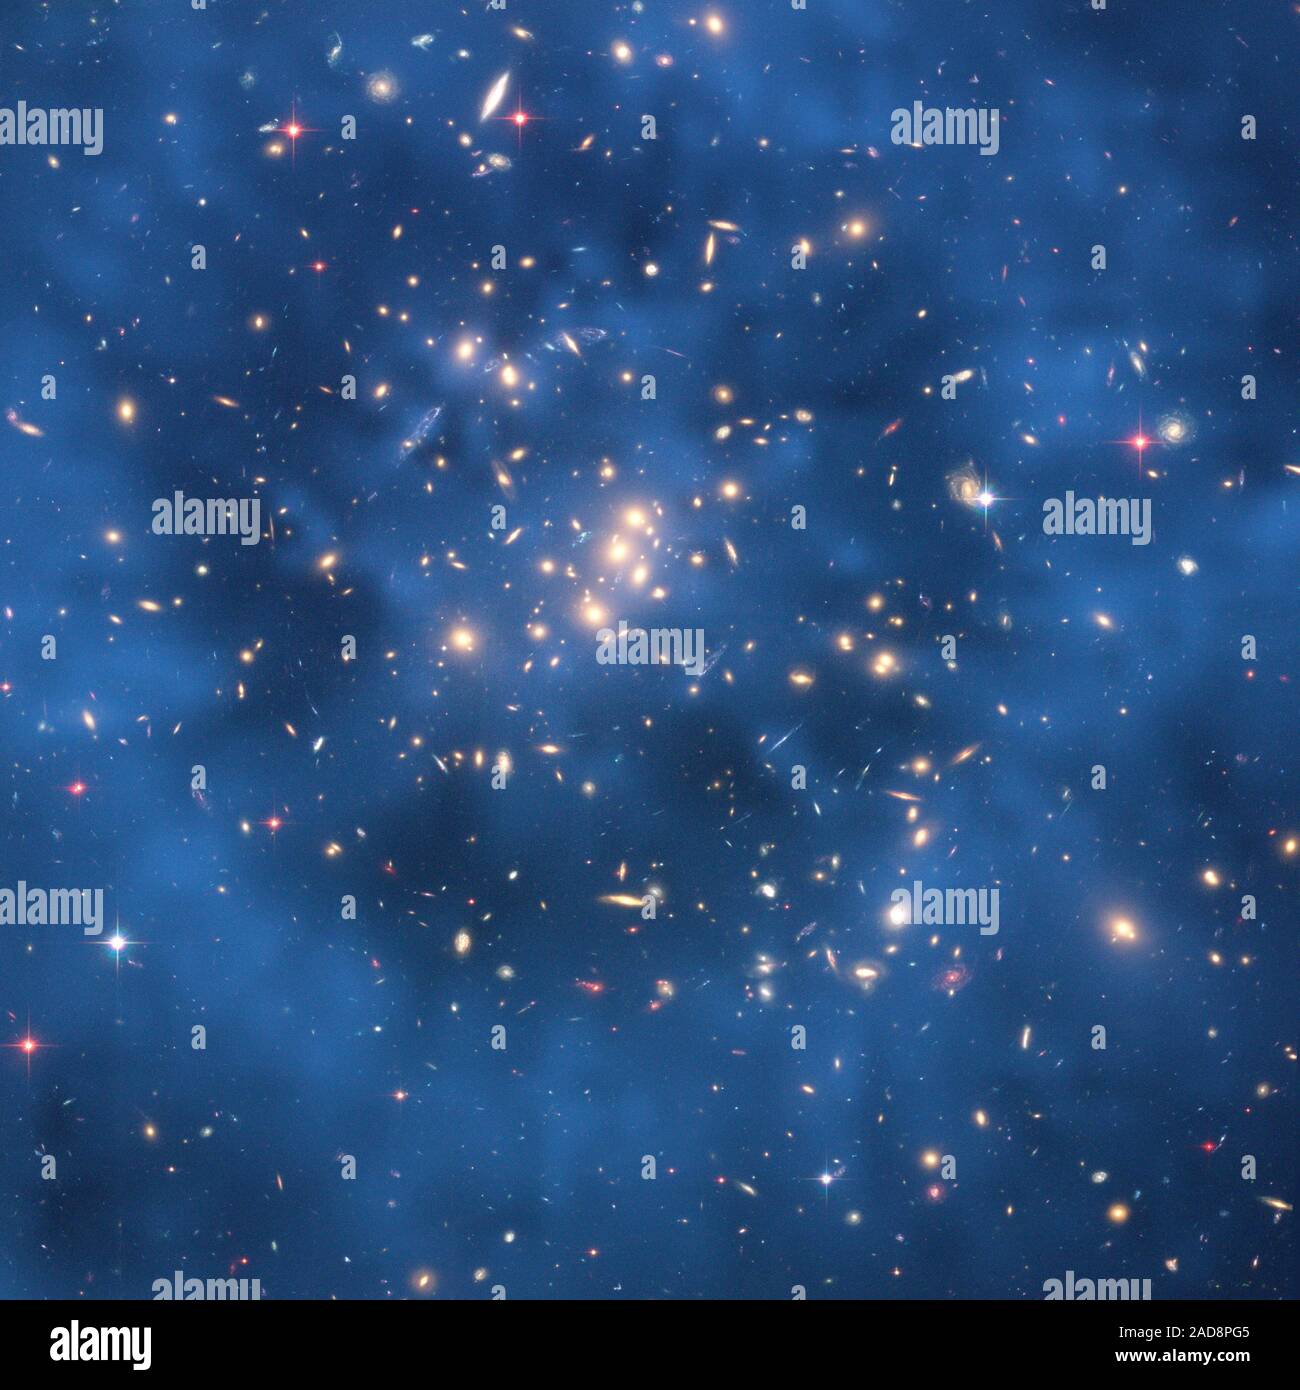 This Hubble Space Telescope composite image shows a ghostly 'ring' of dark matter in the galaxy cluster Cl 0024+17.   The ring-like structure is evident in the blue map of the cluster's dark matter distribution. The map is superimposed on a Hubble image of the cluster. The ring is one of the strongest pieces of evidence to date for the existence of dark matter, an unknown substance that pervades the universe.    The map was derived from Hubble observations of how the gravity of the cluster Cl 0024+17 distorts the light of more distant galaxies, an optical illusion called gravitational lensing. Stock Photo